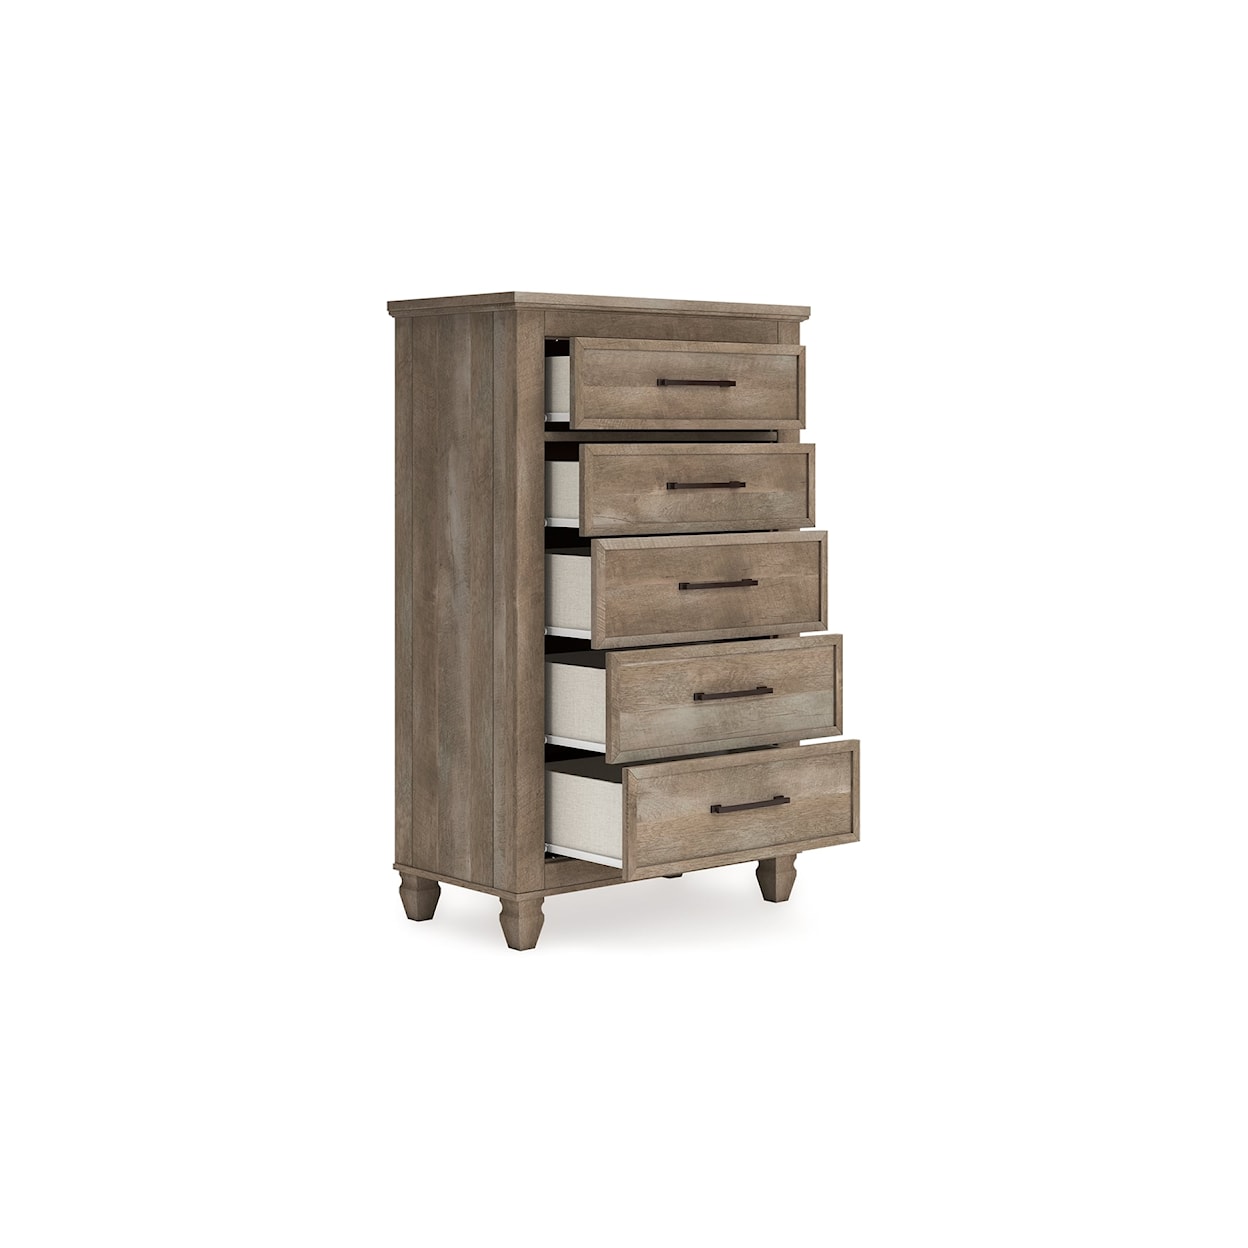 StyleLine Yarbeck Bedroom Chest